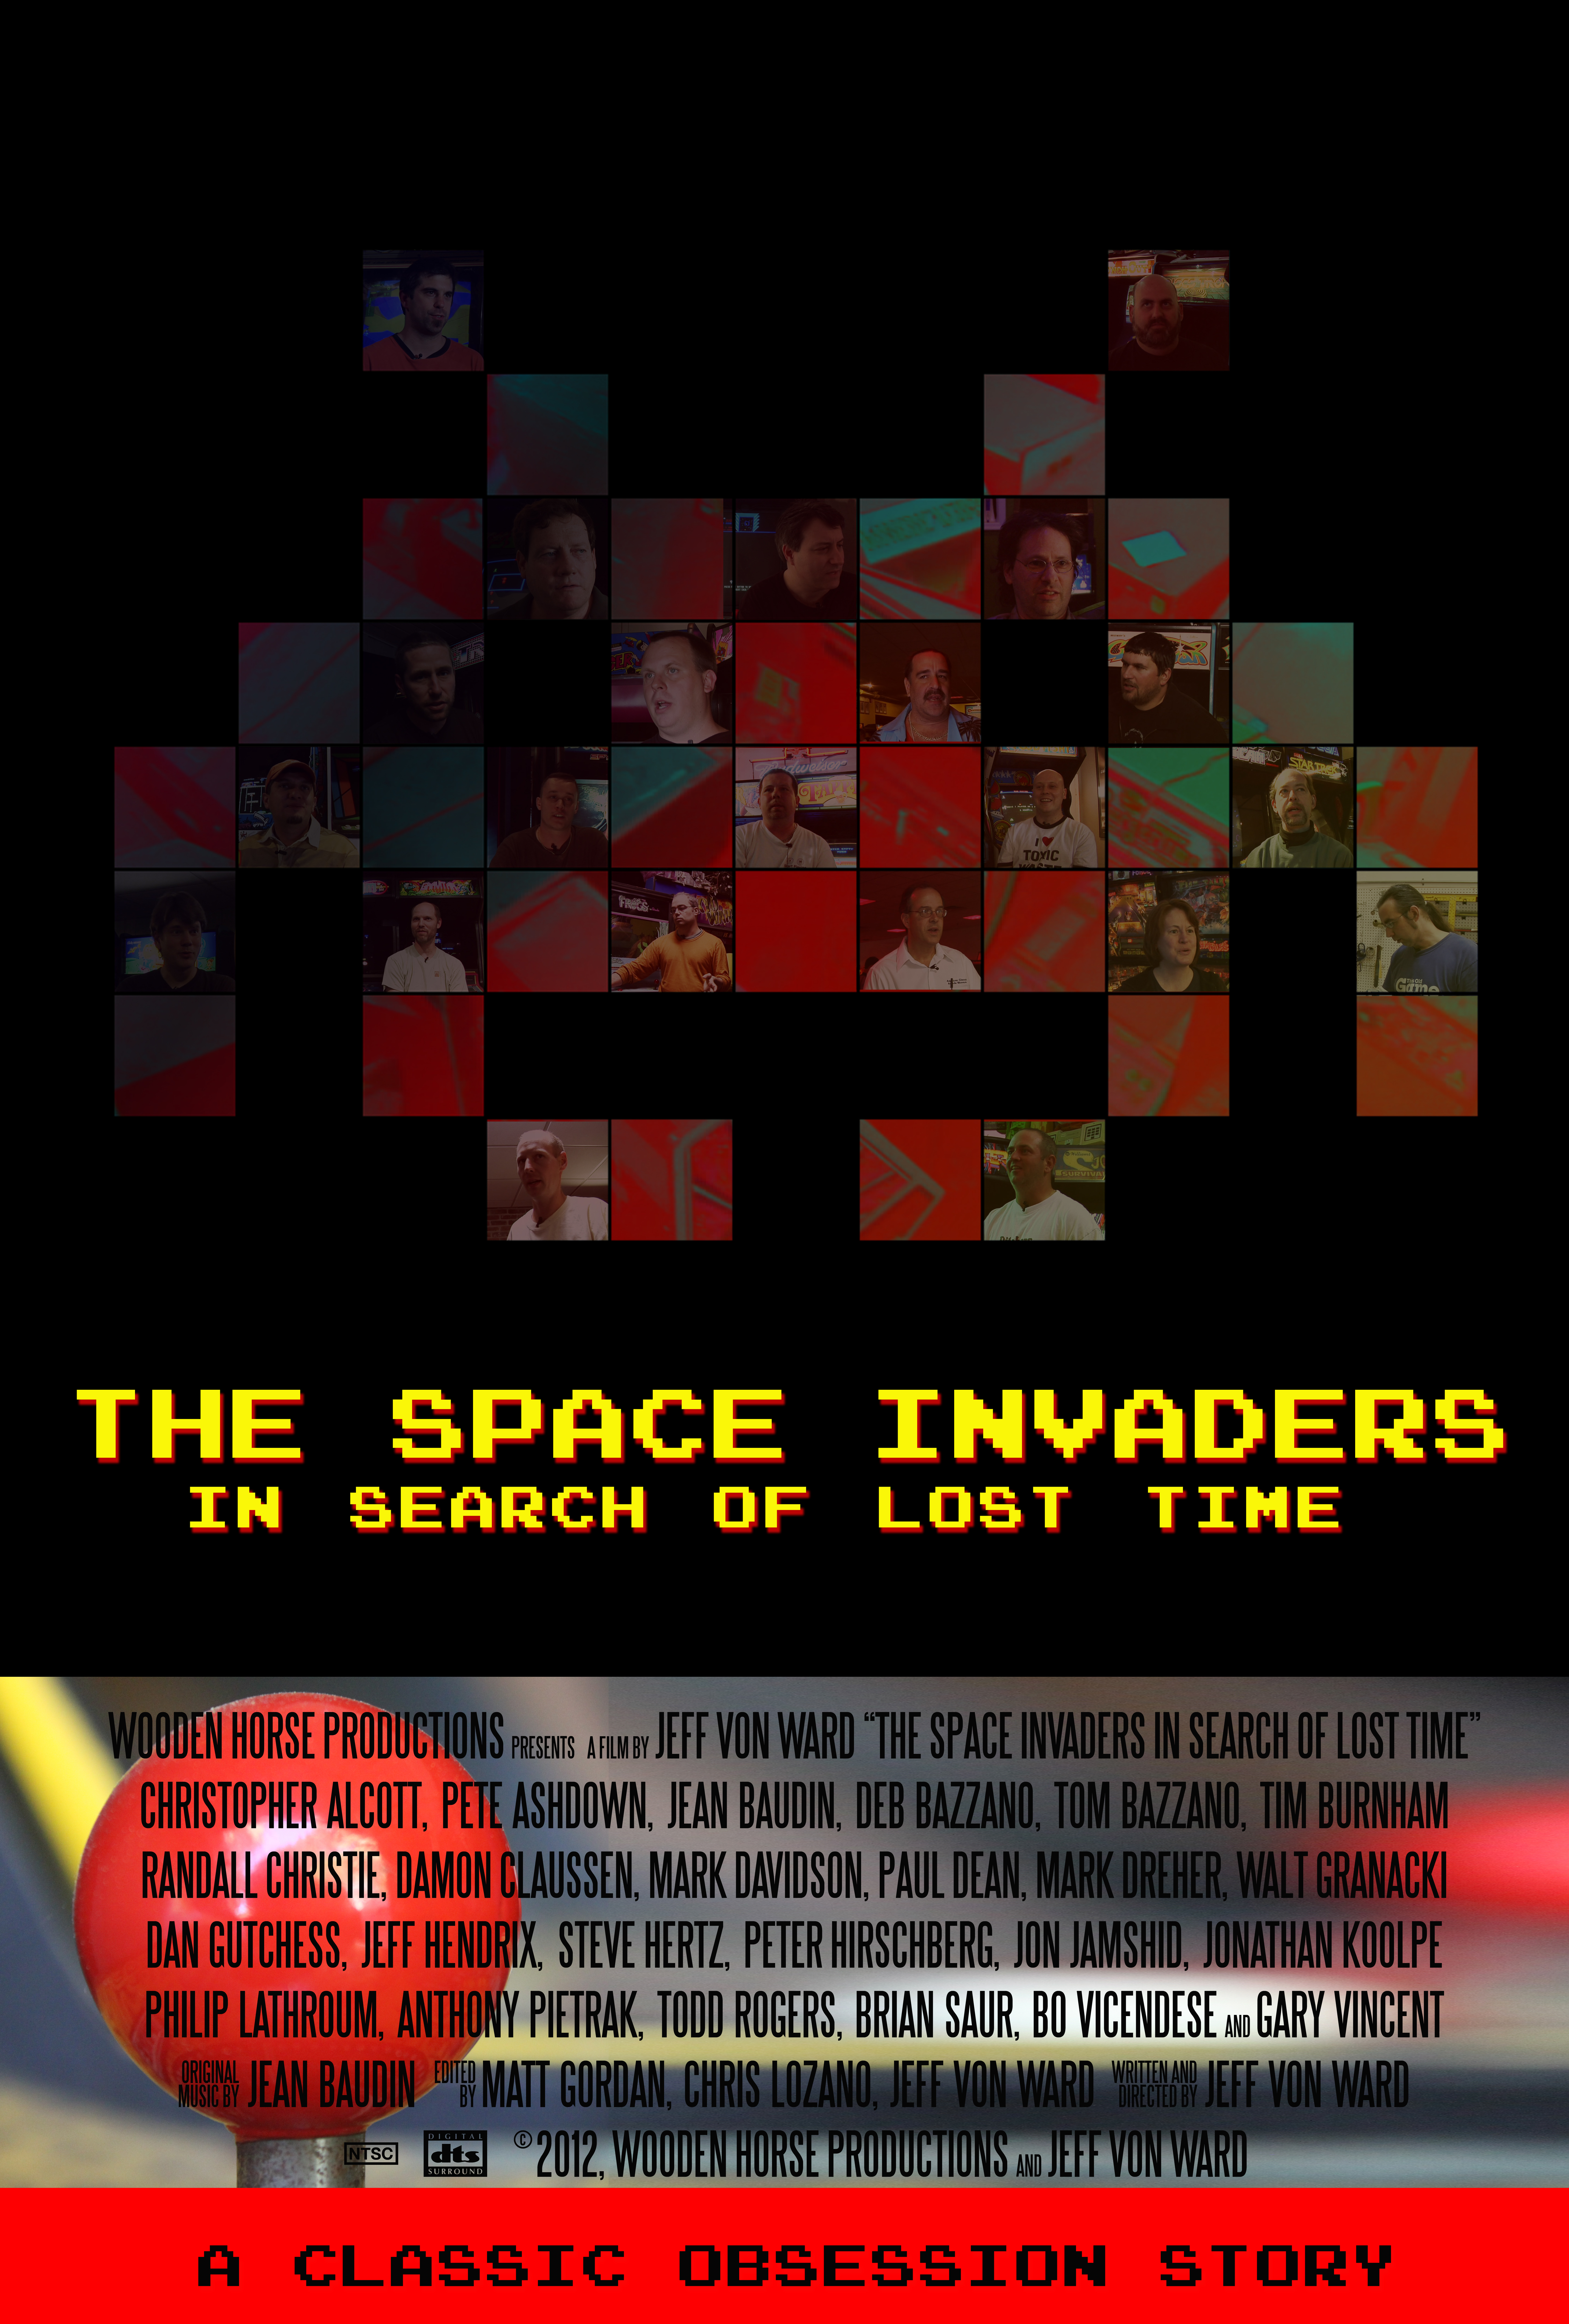 The Space Invaders: In Search of Lost Time (2012) Screenshot 1